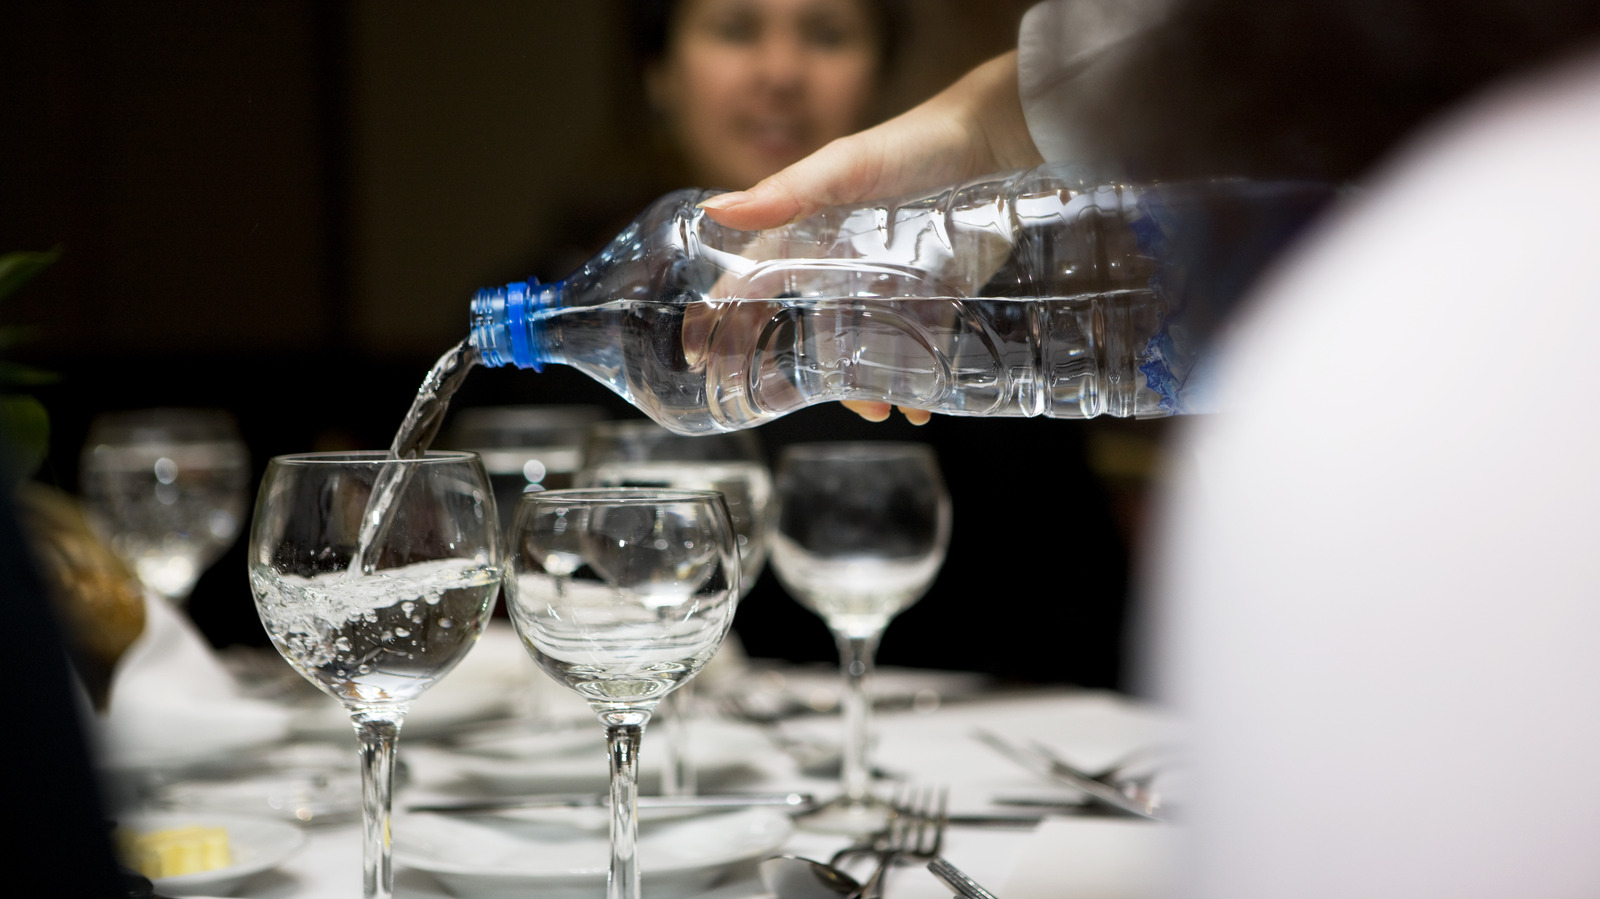 What You Can Tell About A Restaurant’s Hospitality By Its Water – Tasting Table